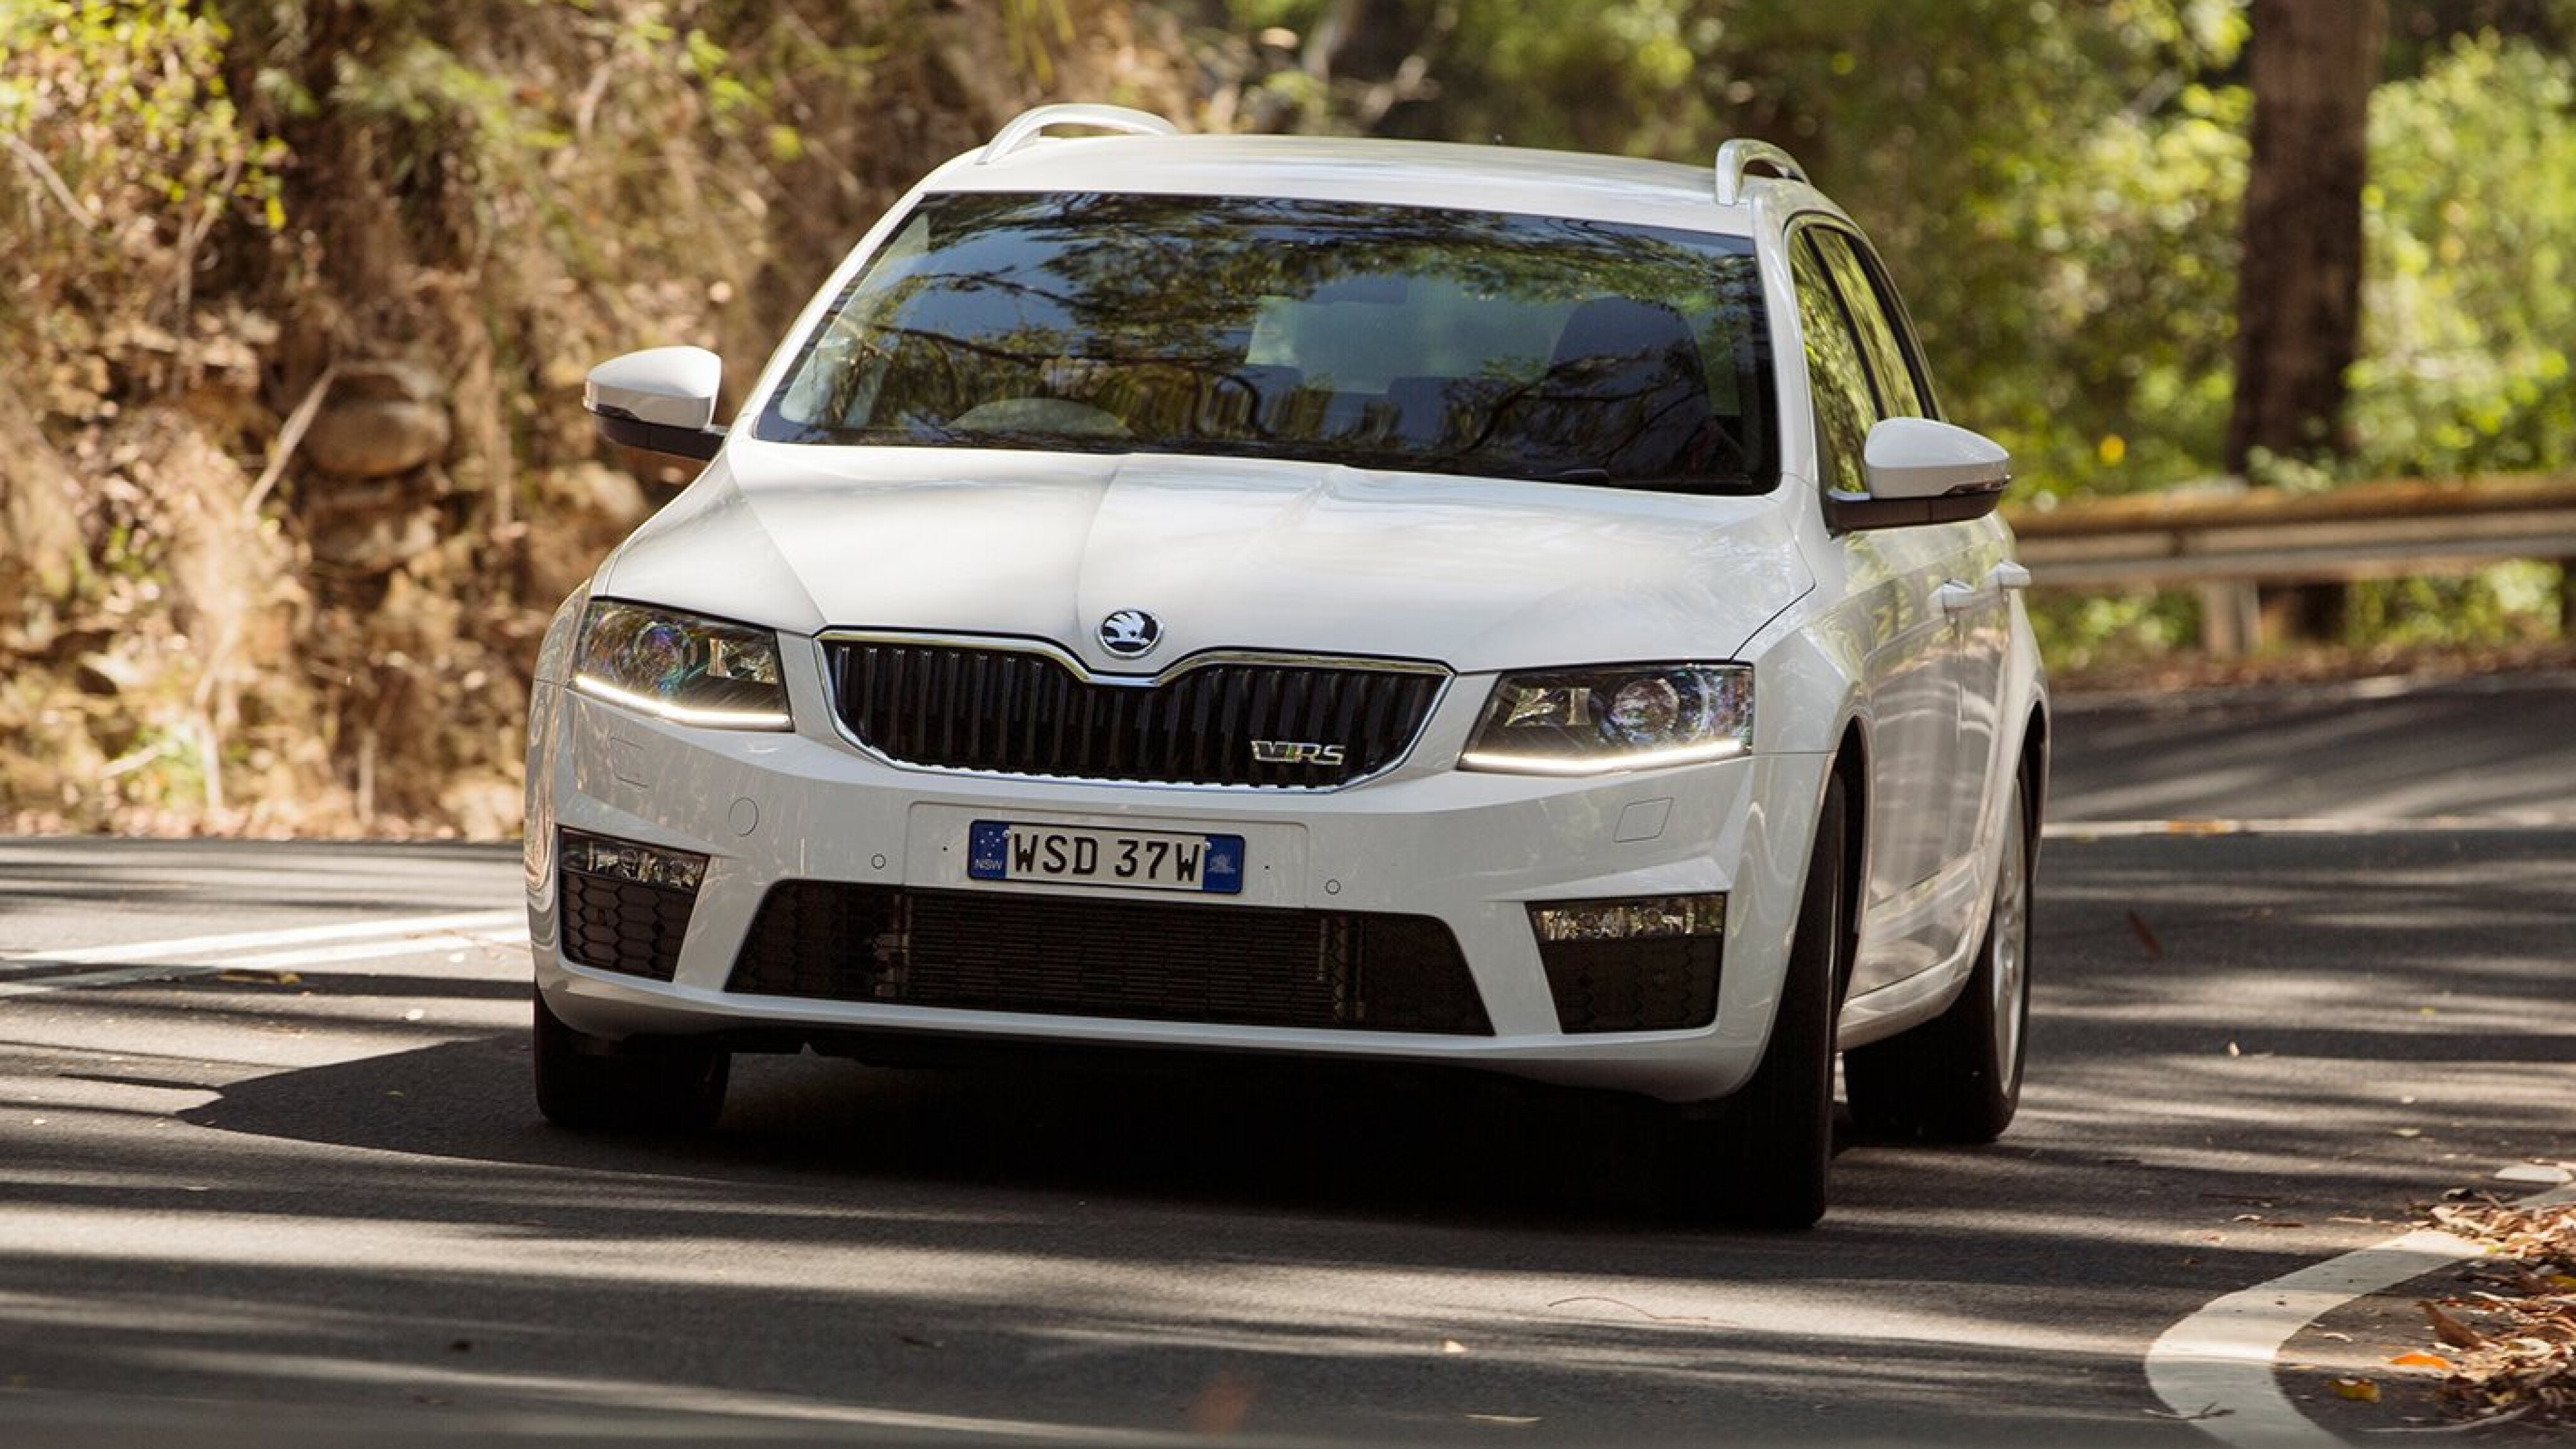 Skoda Octavia RS 2.0 TDI Gains More Traction And Speed With